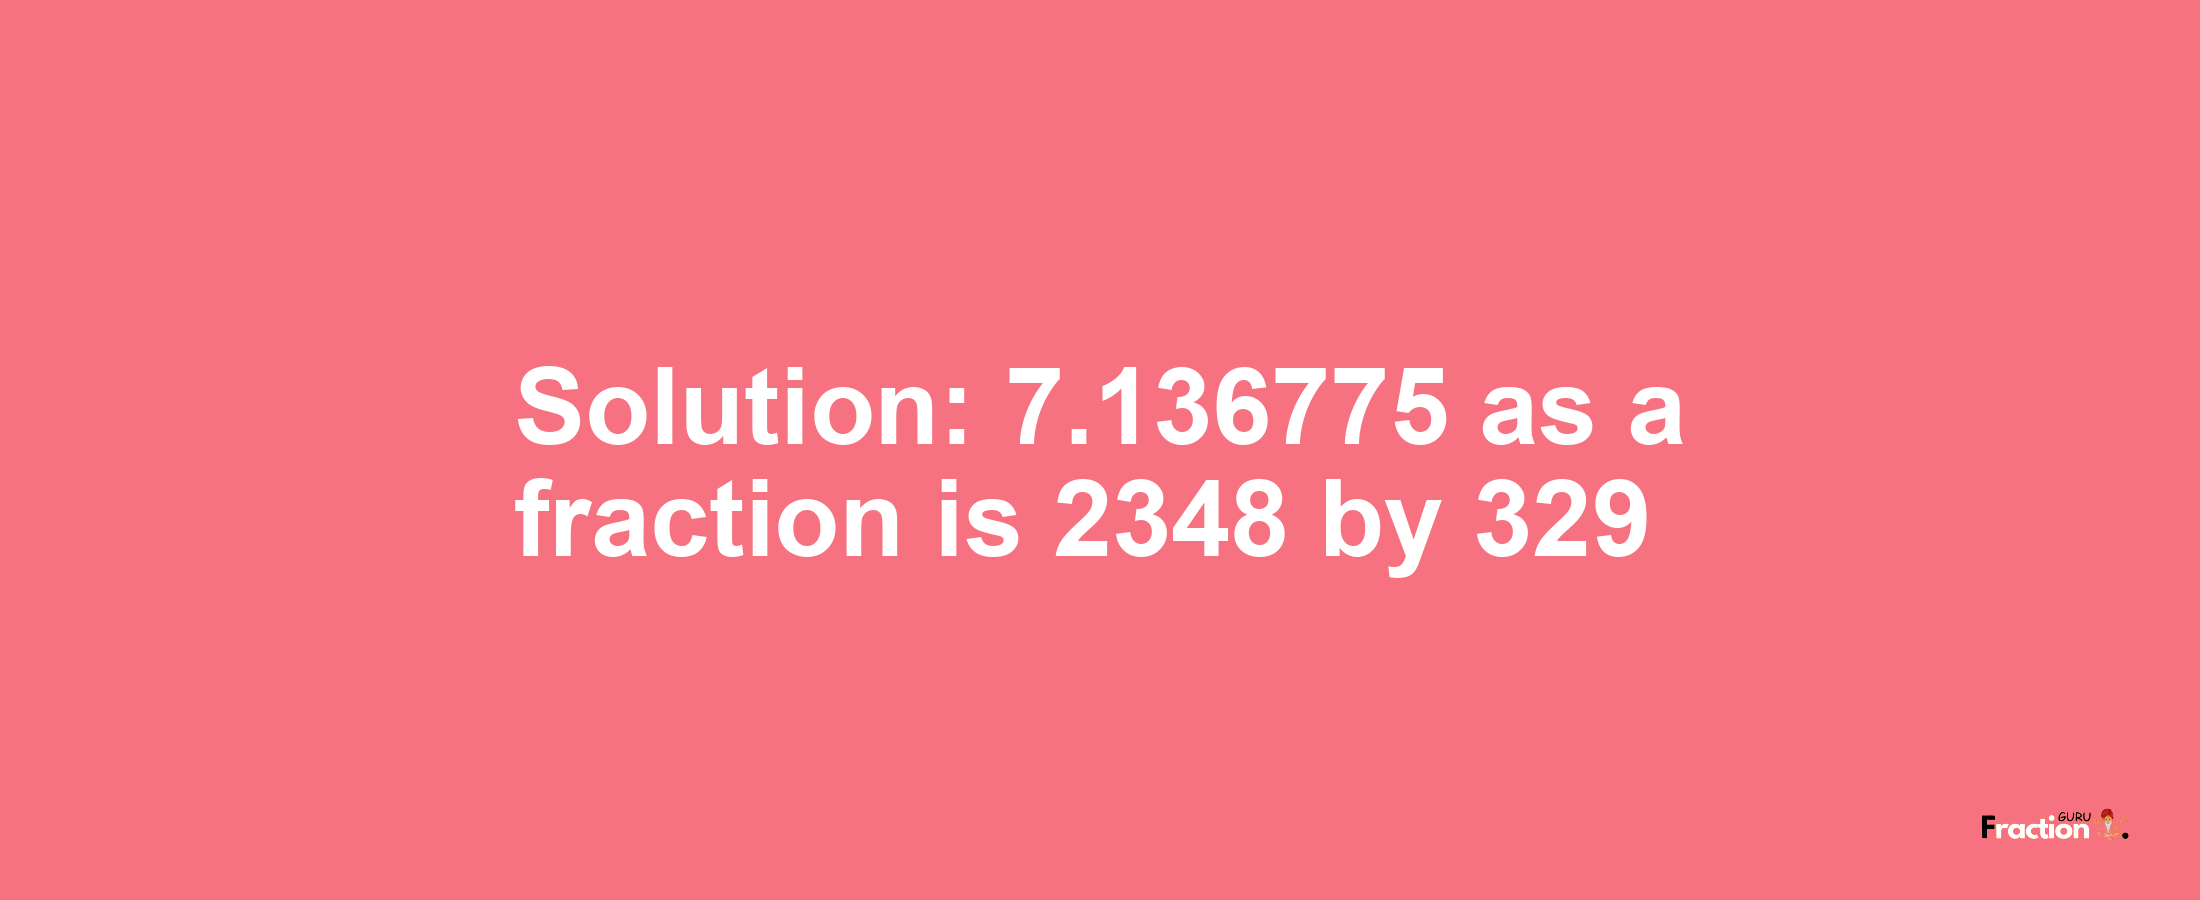 Solution:7.136775 as a fraction is 2348/329